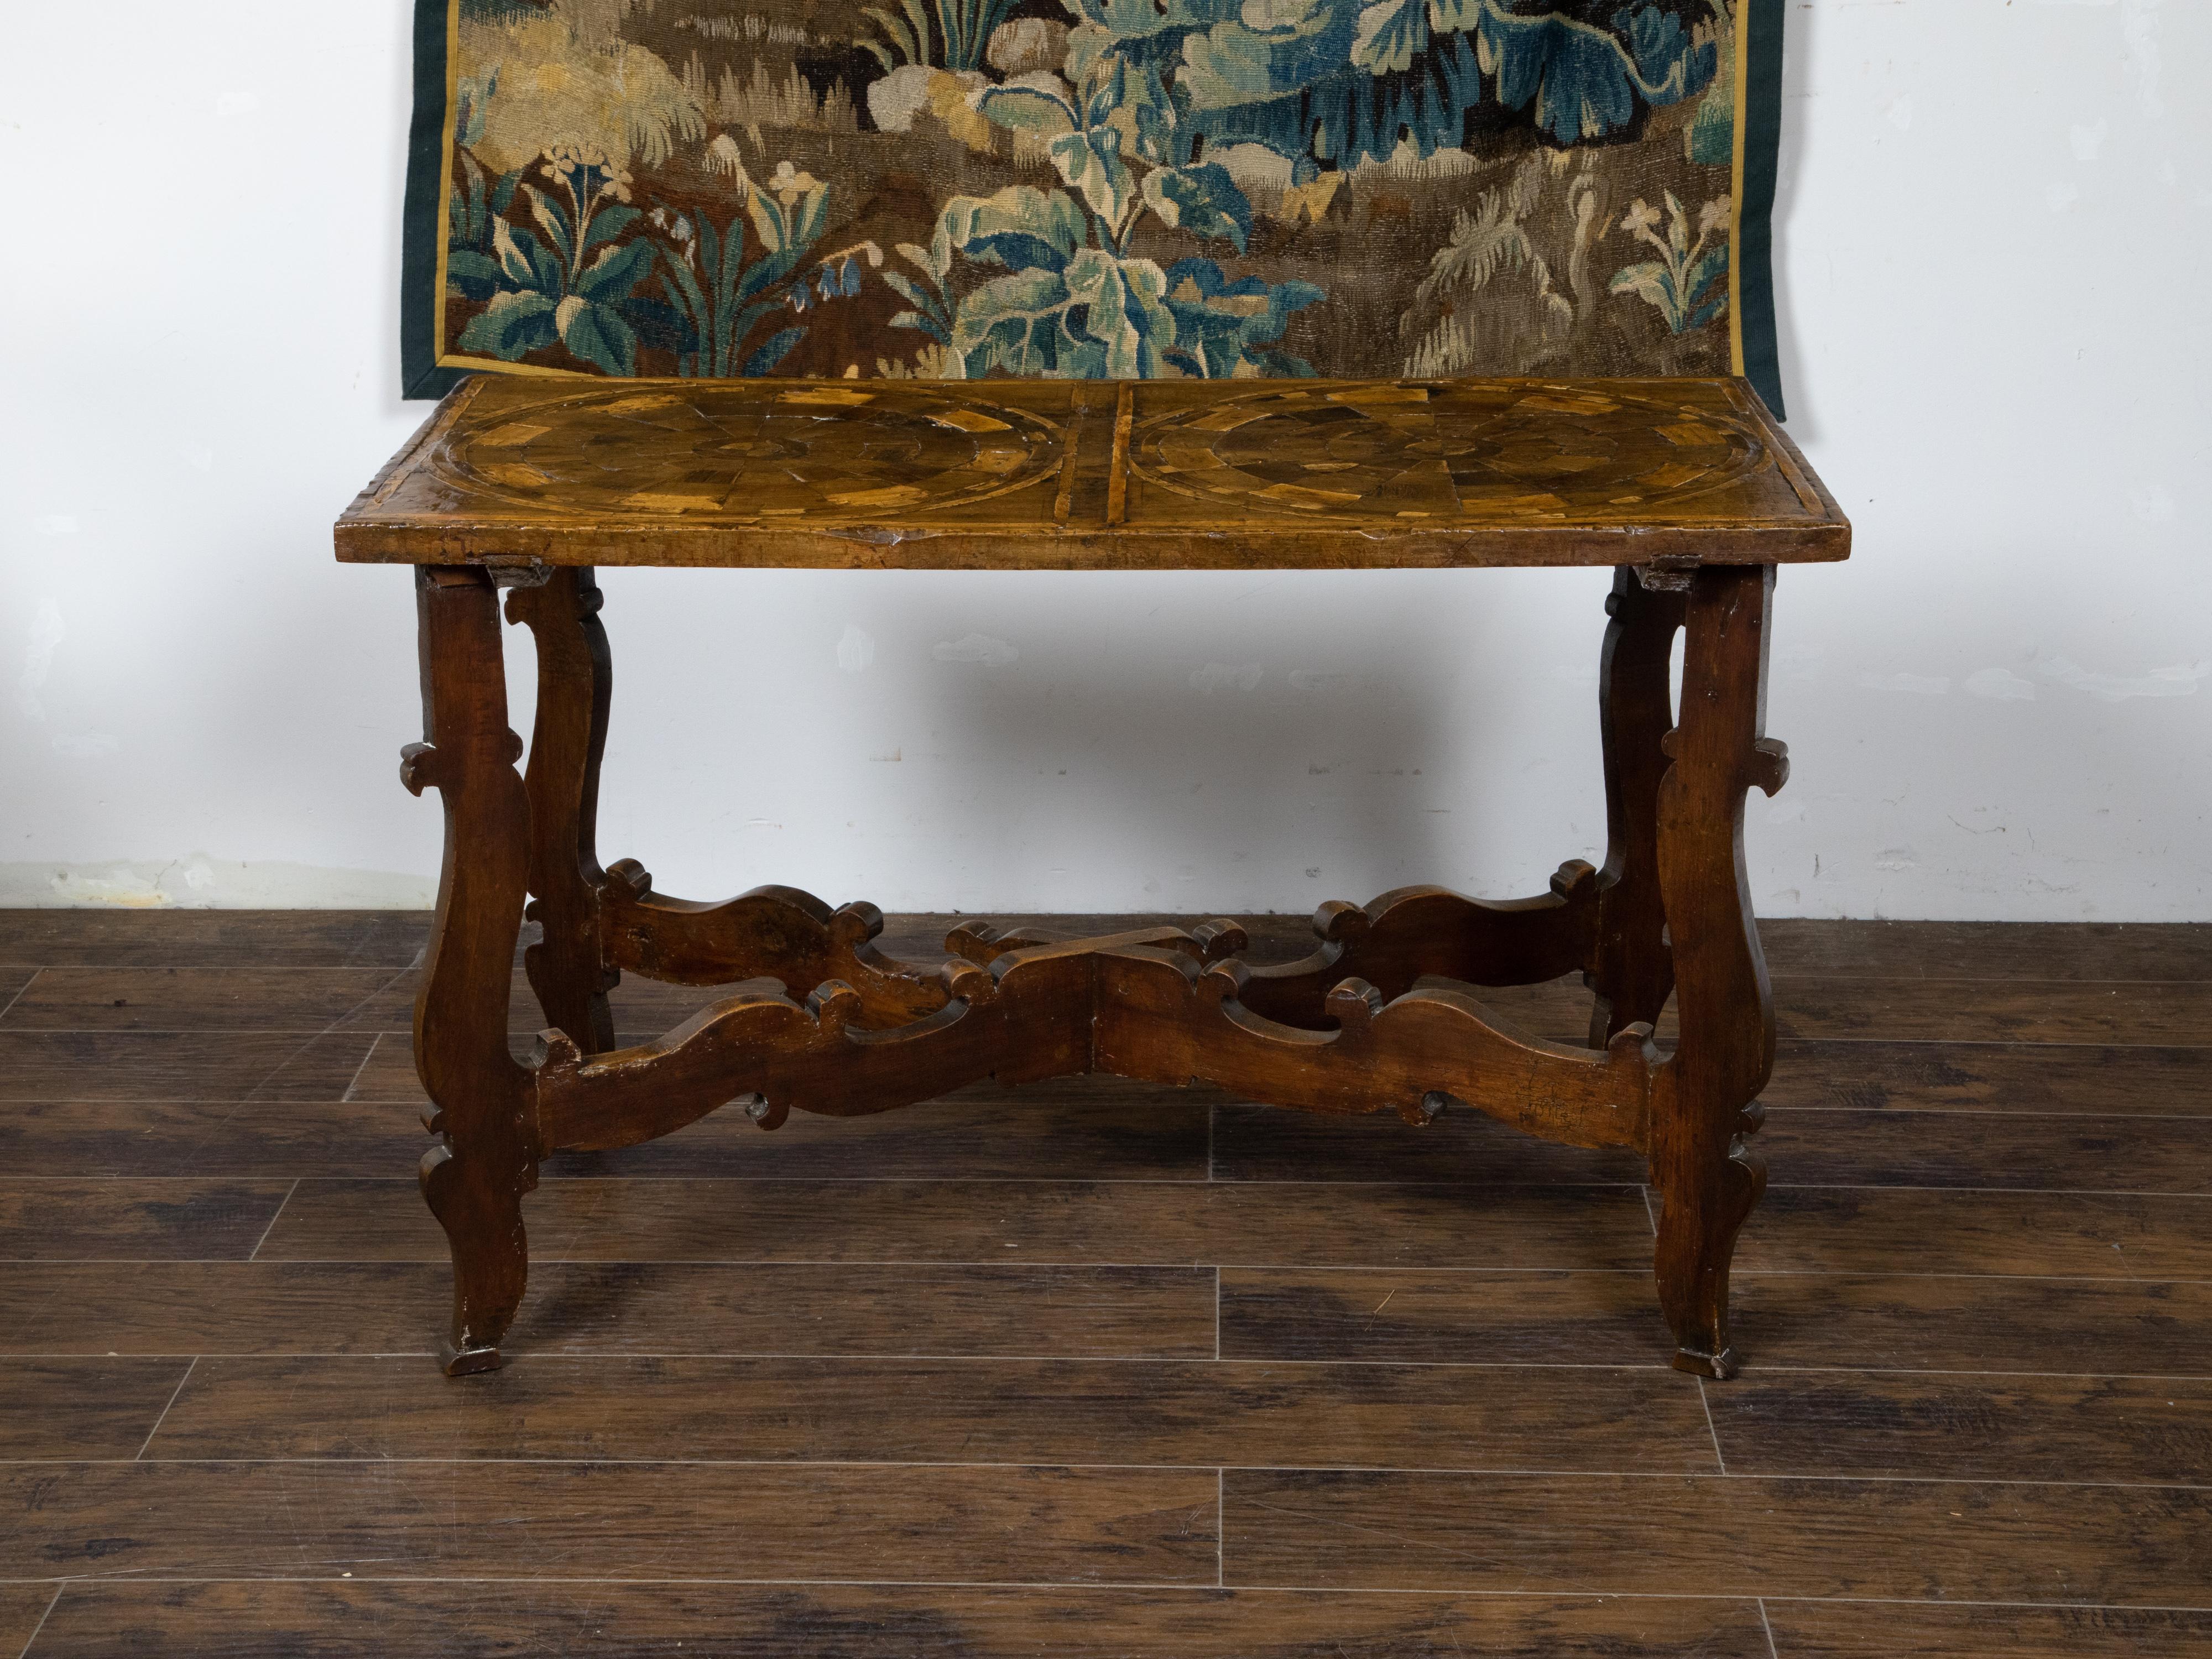 Italian 18th Century Baroque Style Carved Walnut Table with Marquetry Décor For Sale 2